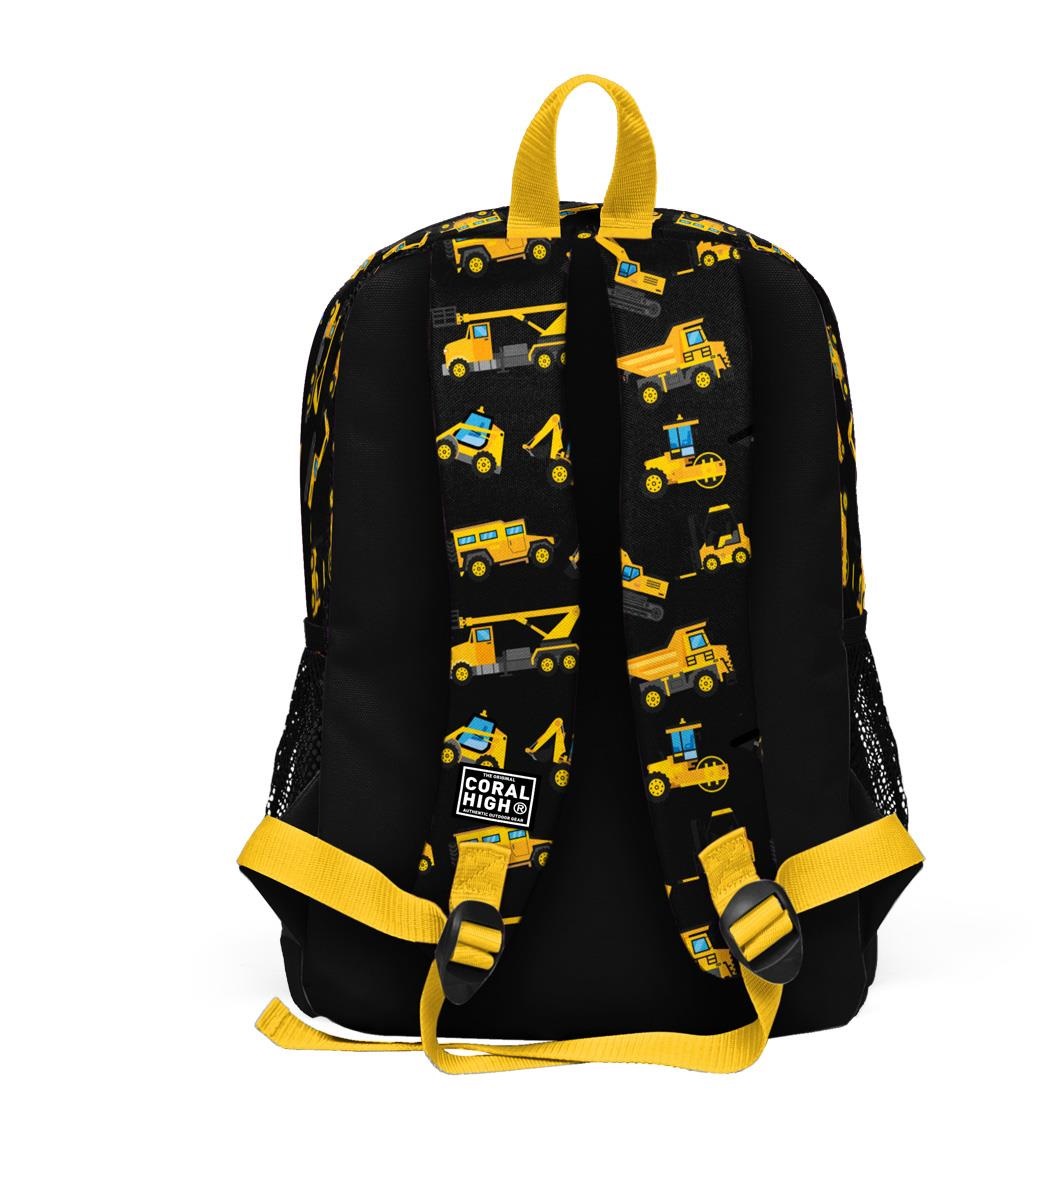 Coral High Kids Four Compartment School Backpack - Black Yellow Backhoe Patterned